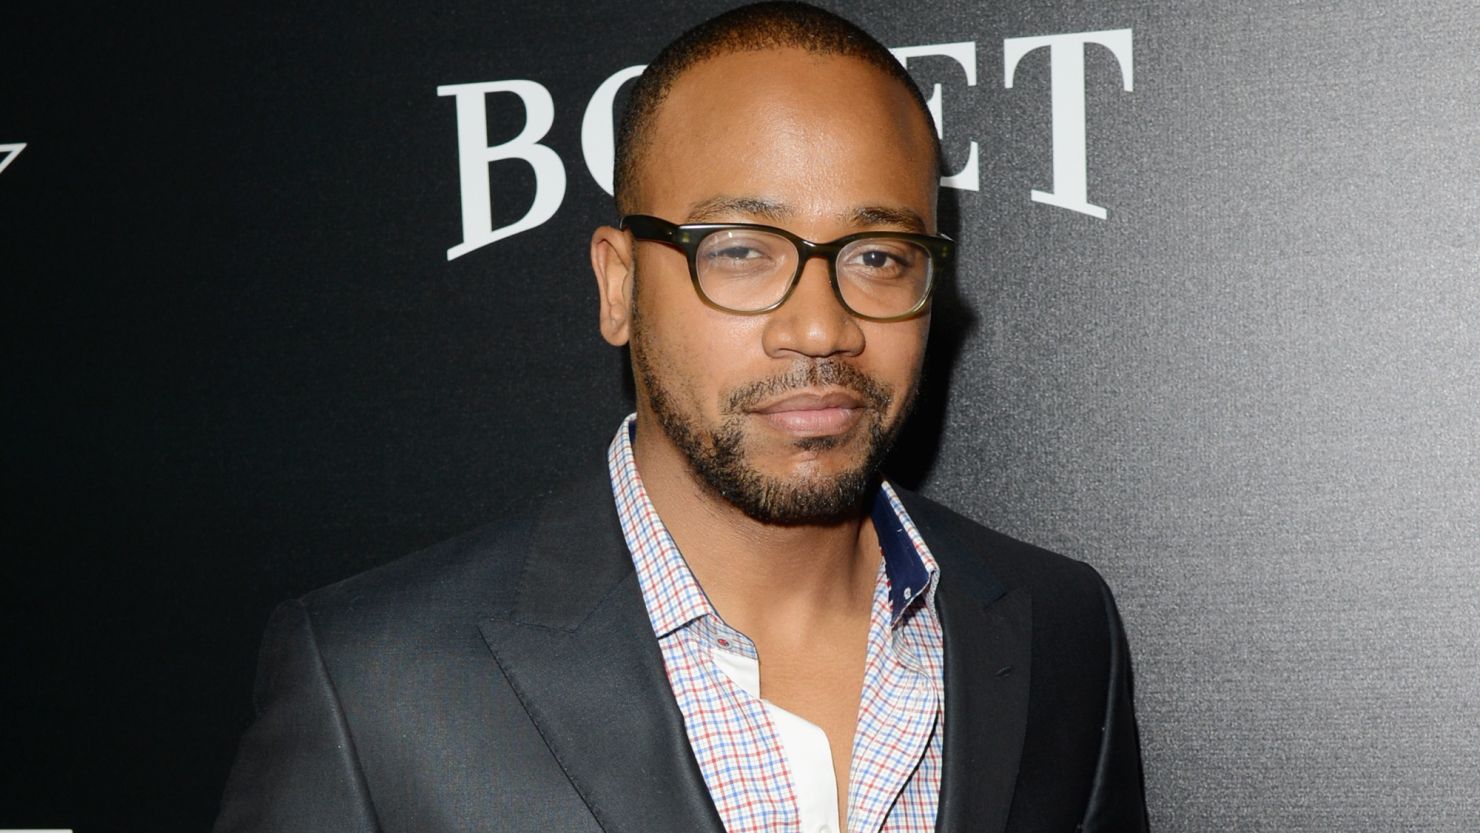 Columbus Short was on the ABC hit show "Scandal" for three years.